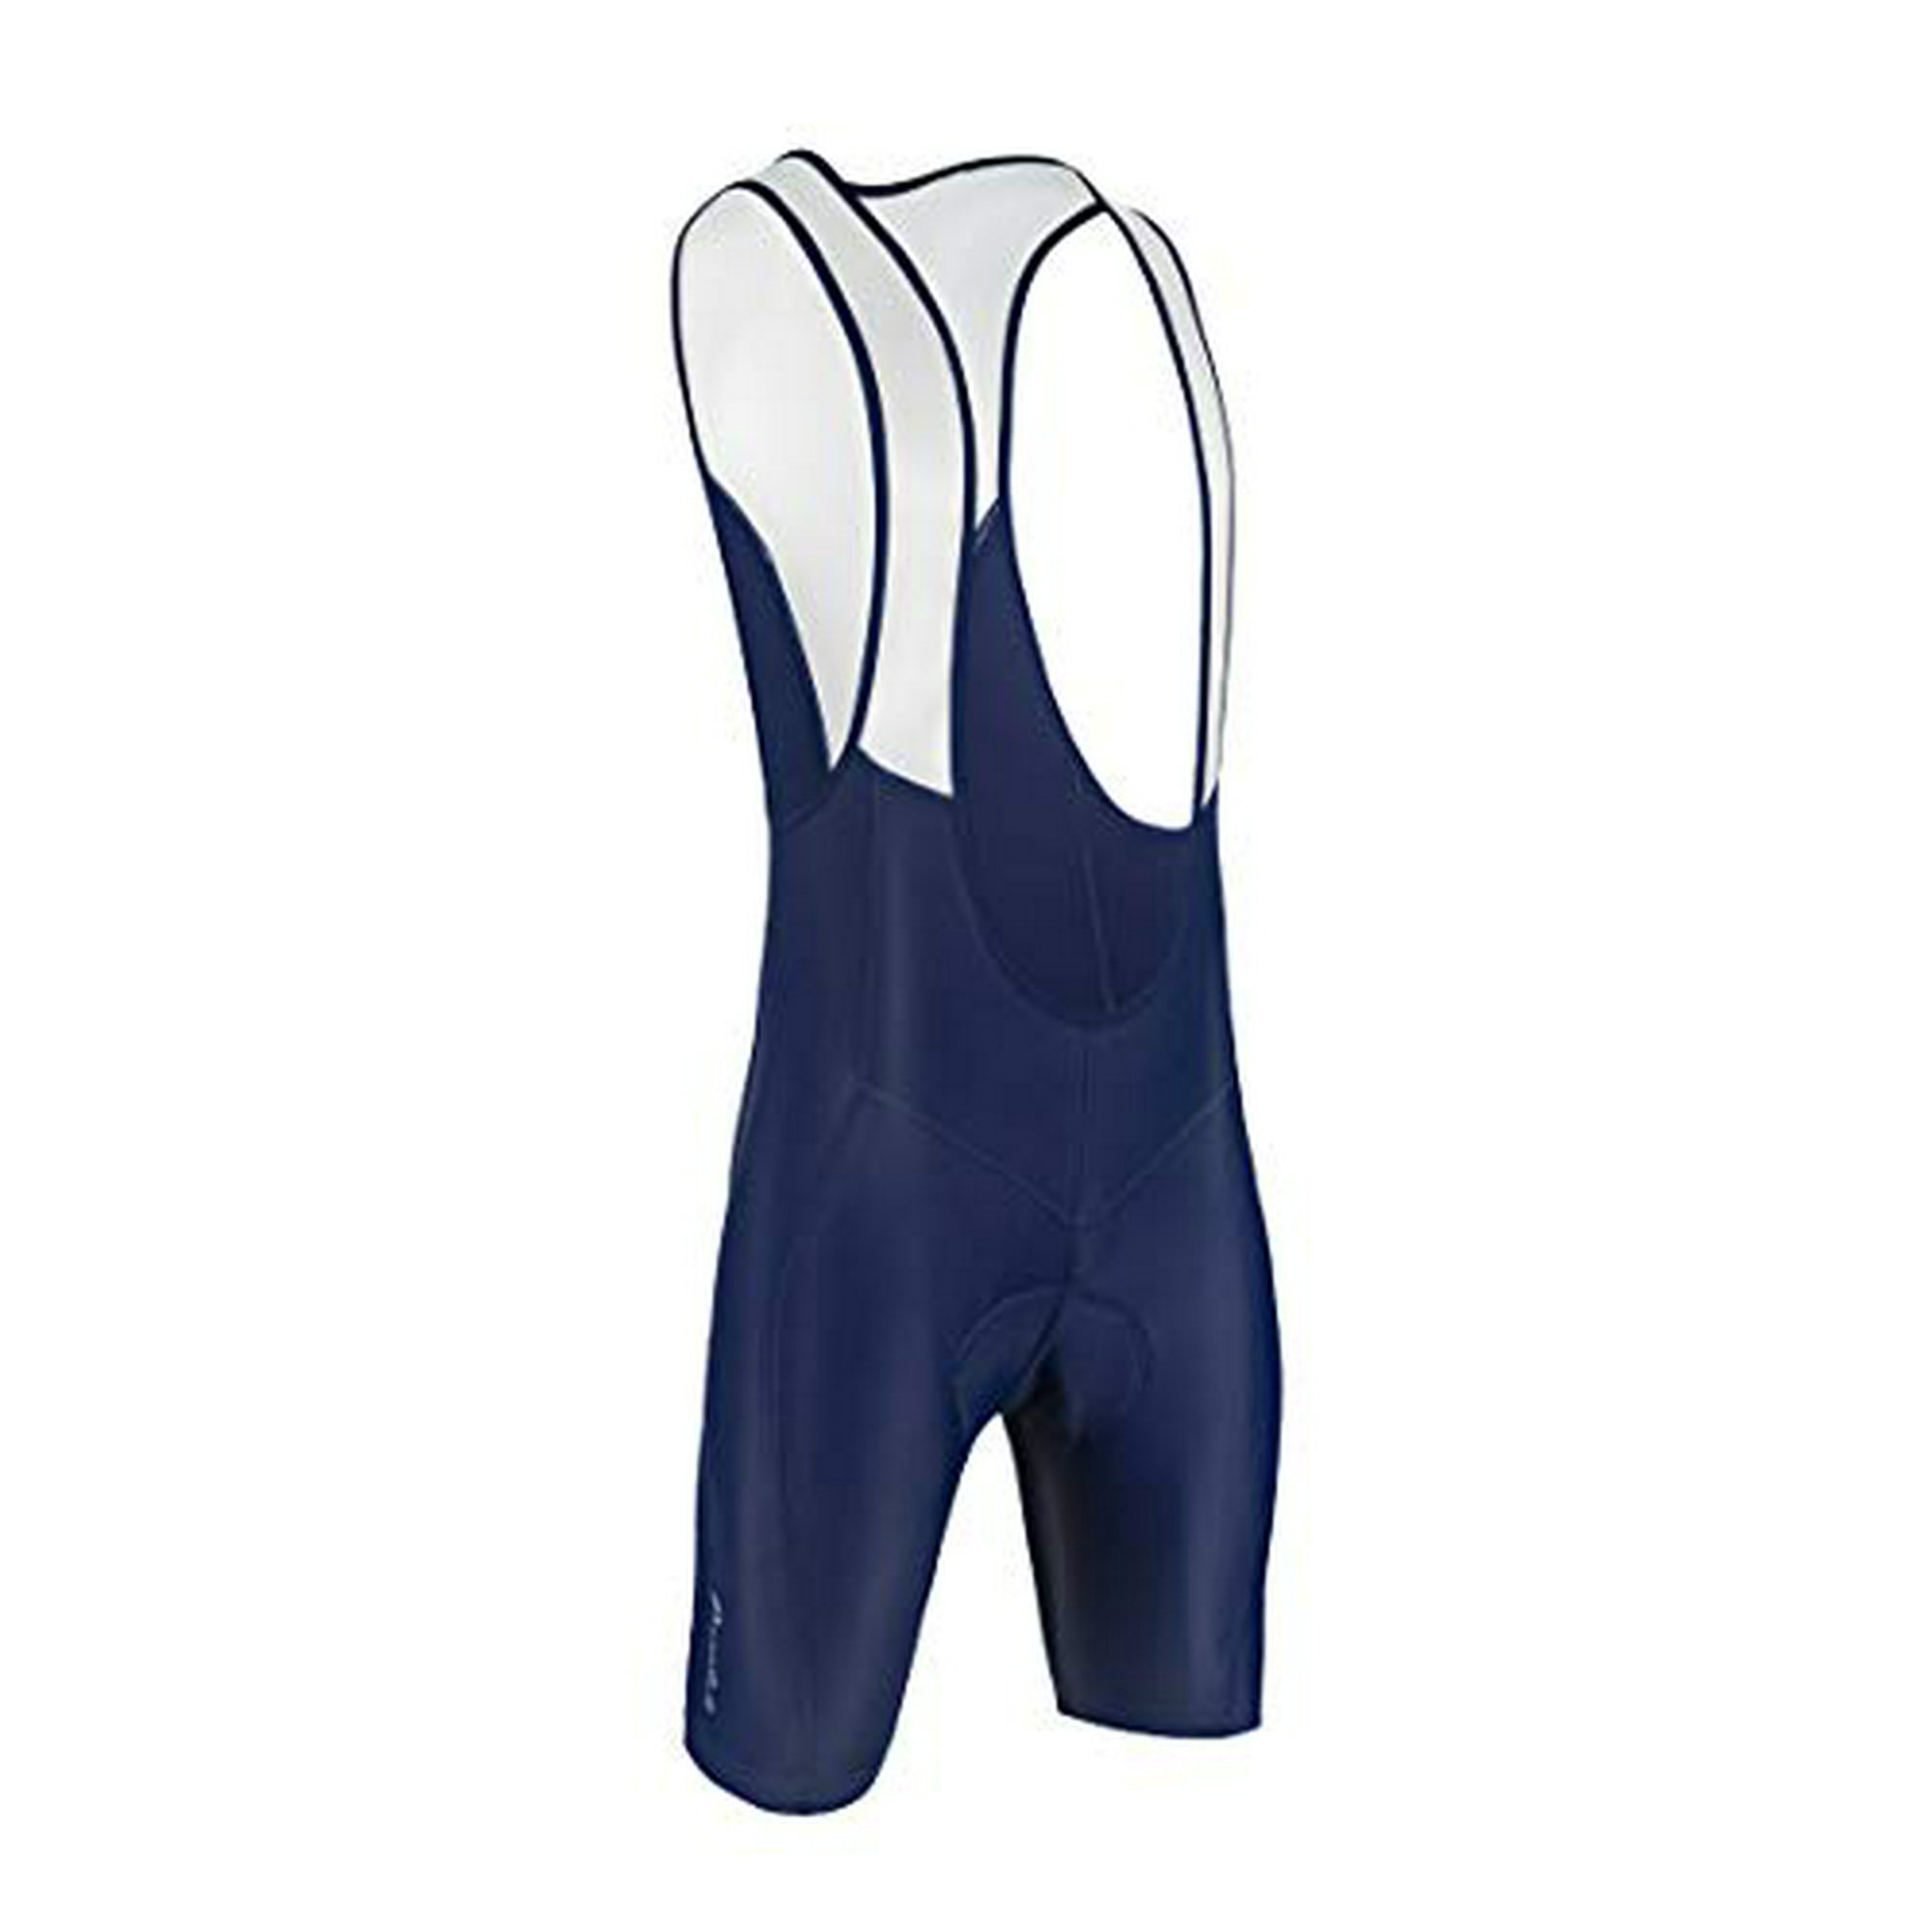 Excellent Performance and Better Fit Przewalski Men’s 3D Padded Cycling Bike Bib Shorts 